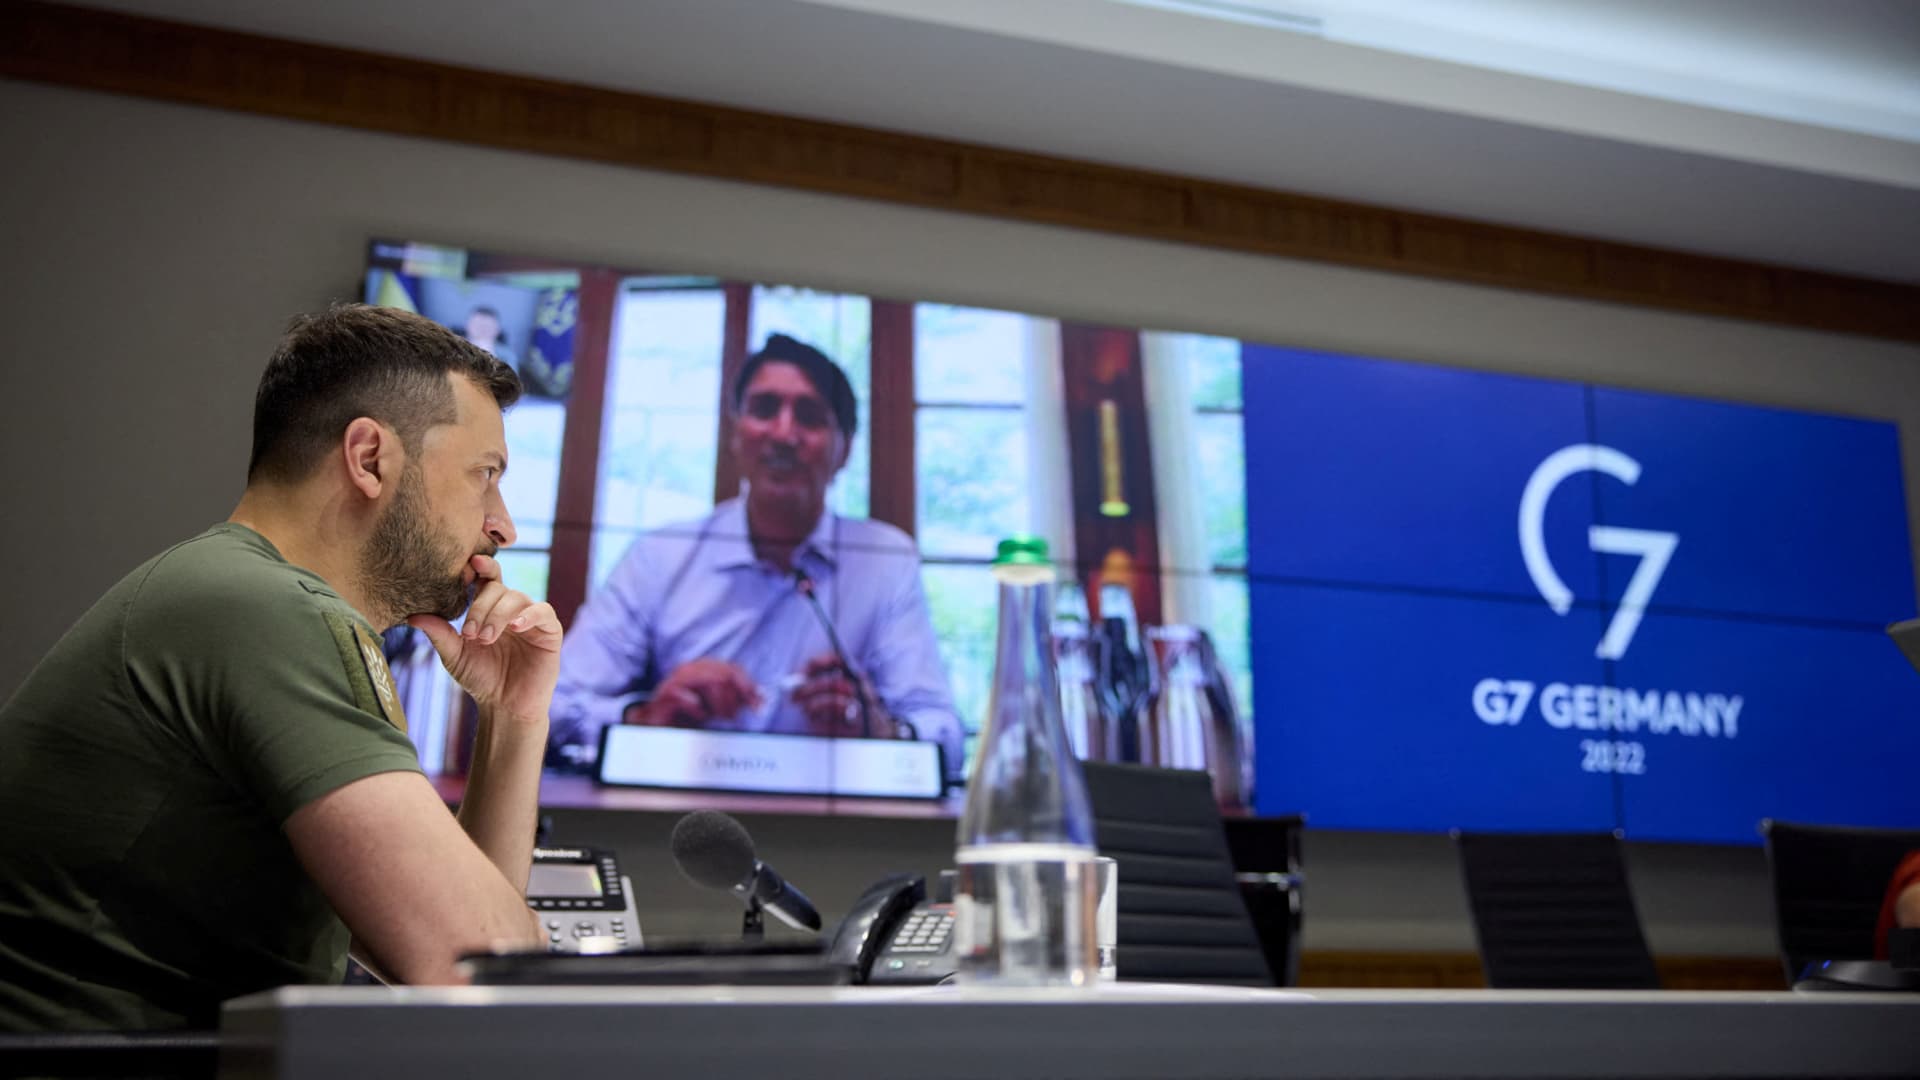 Ukraine's President Volodymyr Zelenskyy attends a working session of G-7 leaders via video link, as Russia's attack on Ukraine continues, in Kyiv,on June 27, 2022.